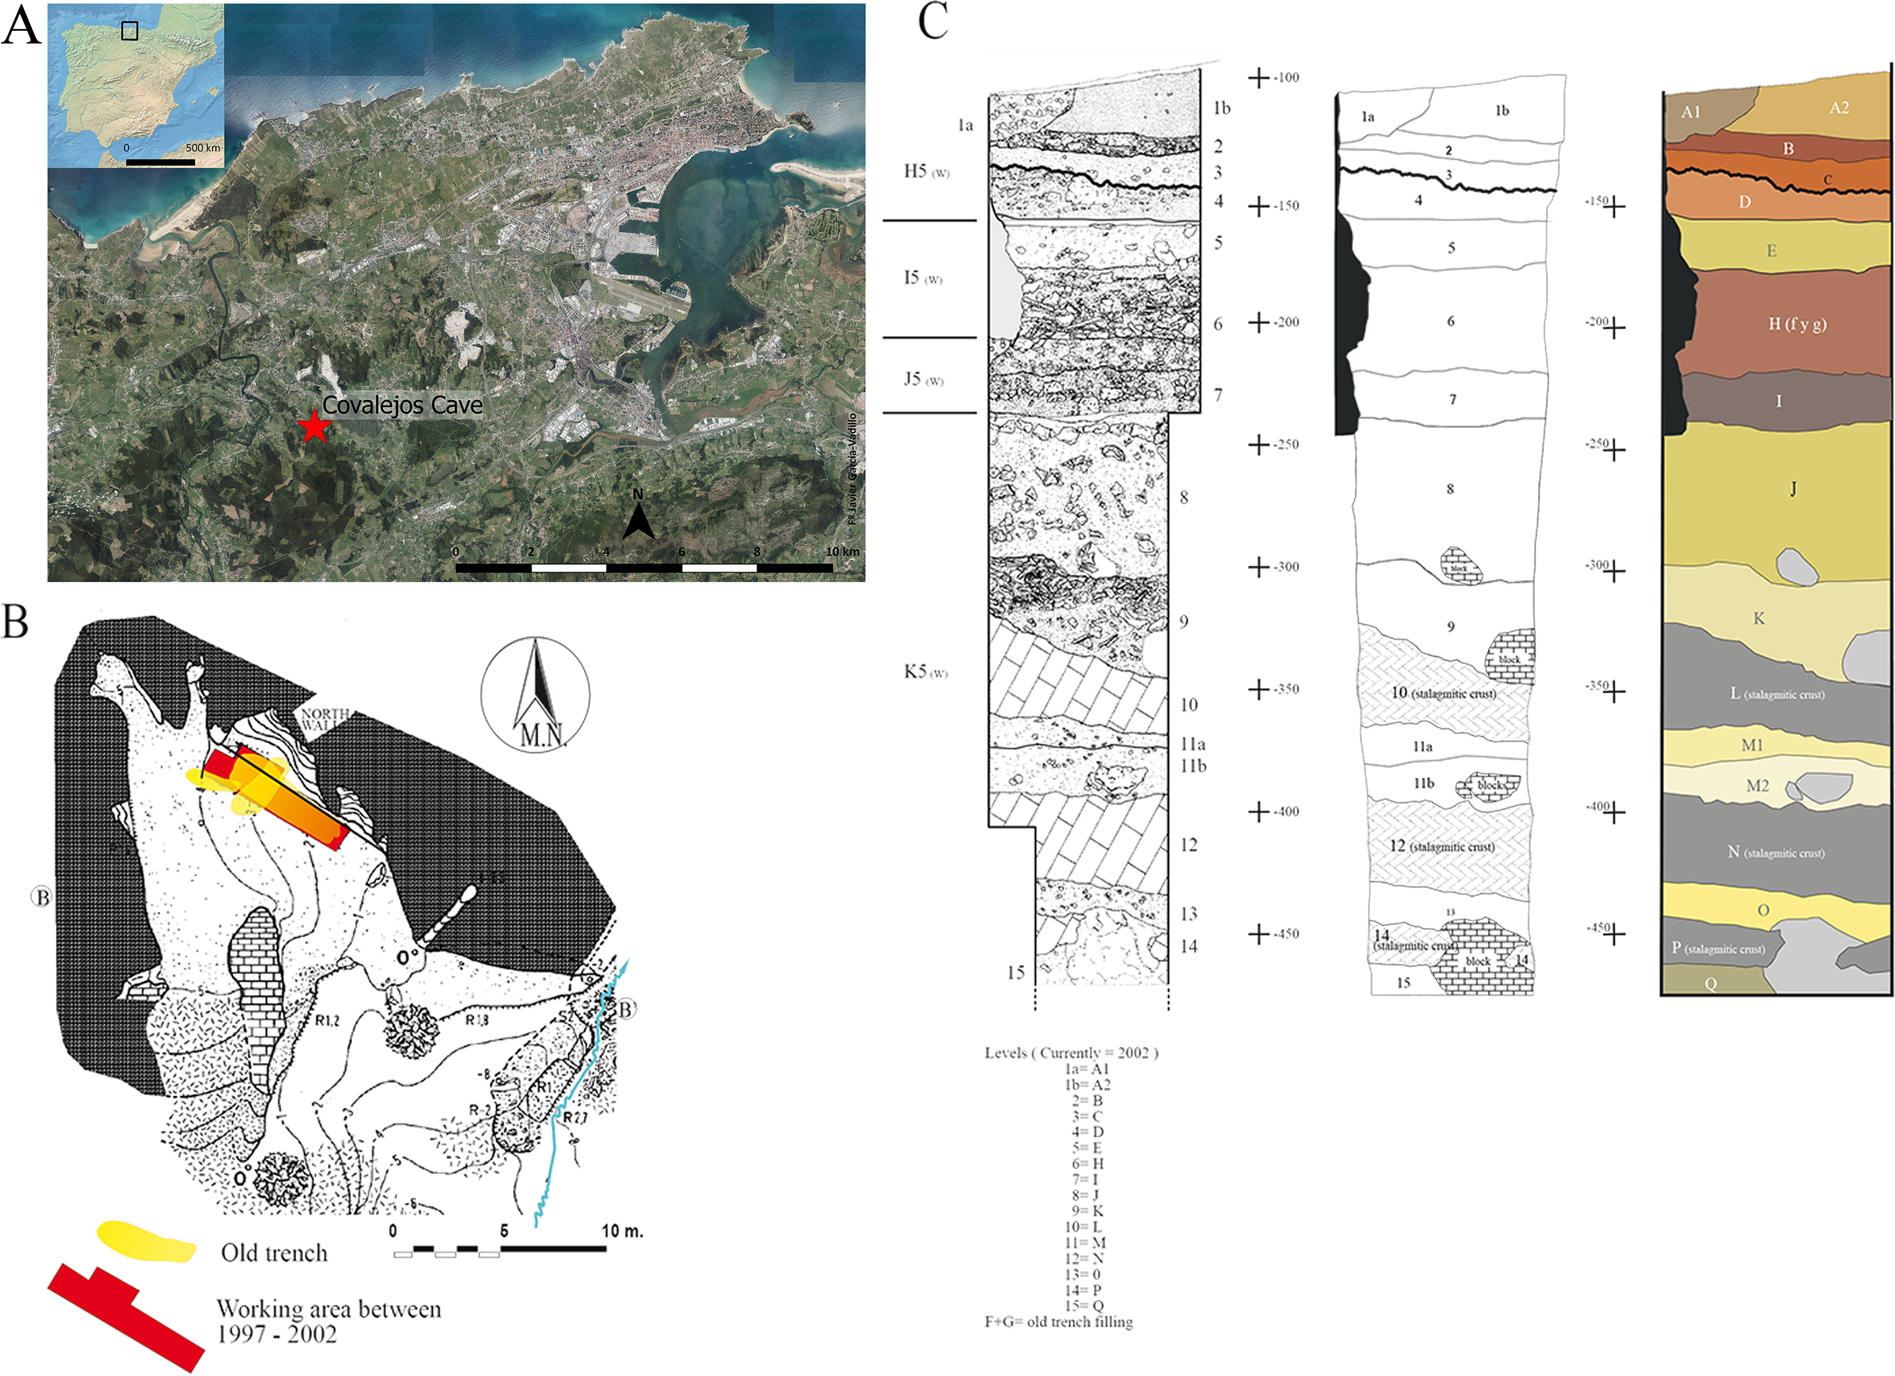 Combined dental wear and cementum analyses in ungulates reveal the  seasonality of Neanderthal occupations in Covalejos Cave (Northern Iberia)  | Scientific Reports